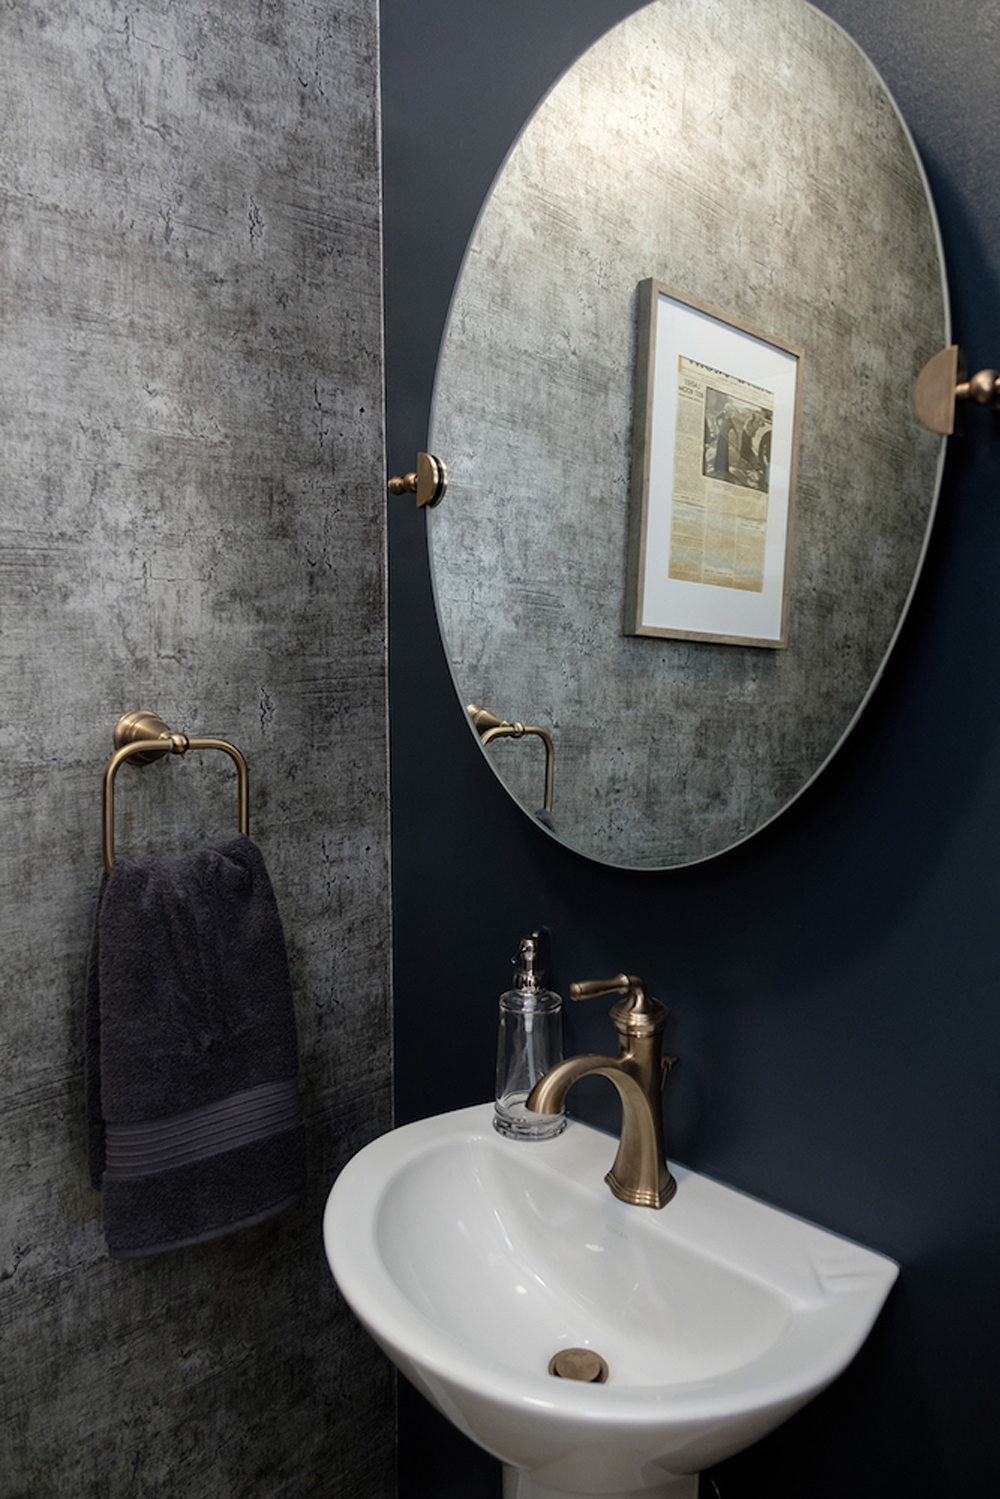 A tiny powder room with a chic aluminum effect and large mirror reflecting newspaper wall art